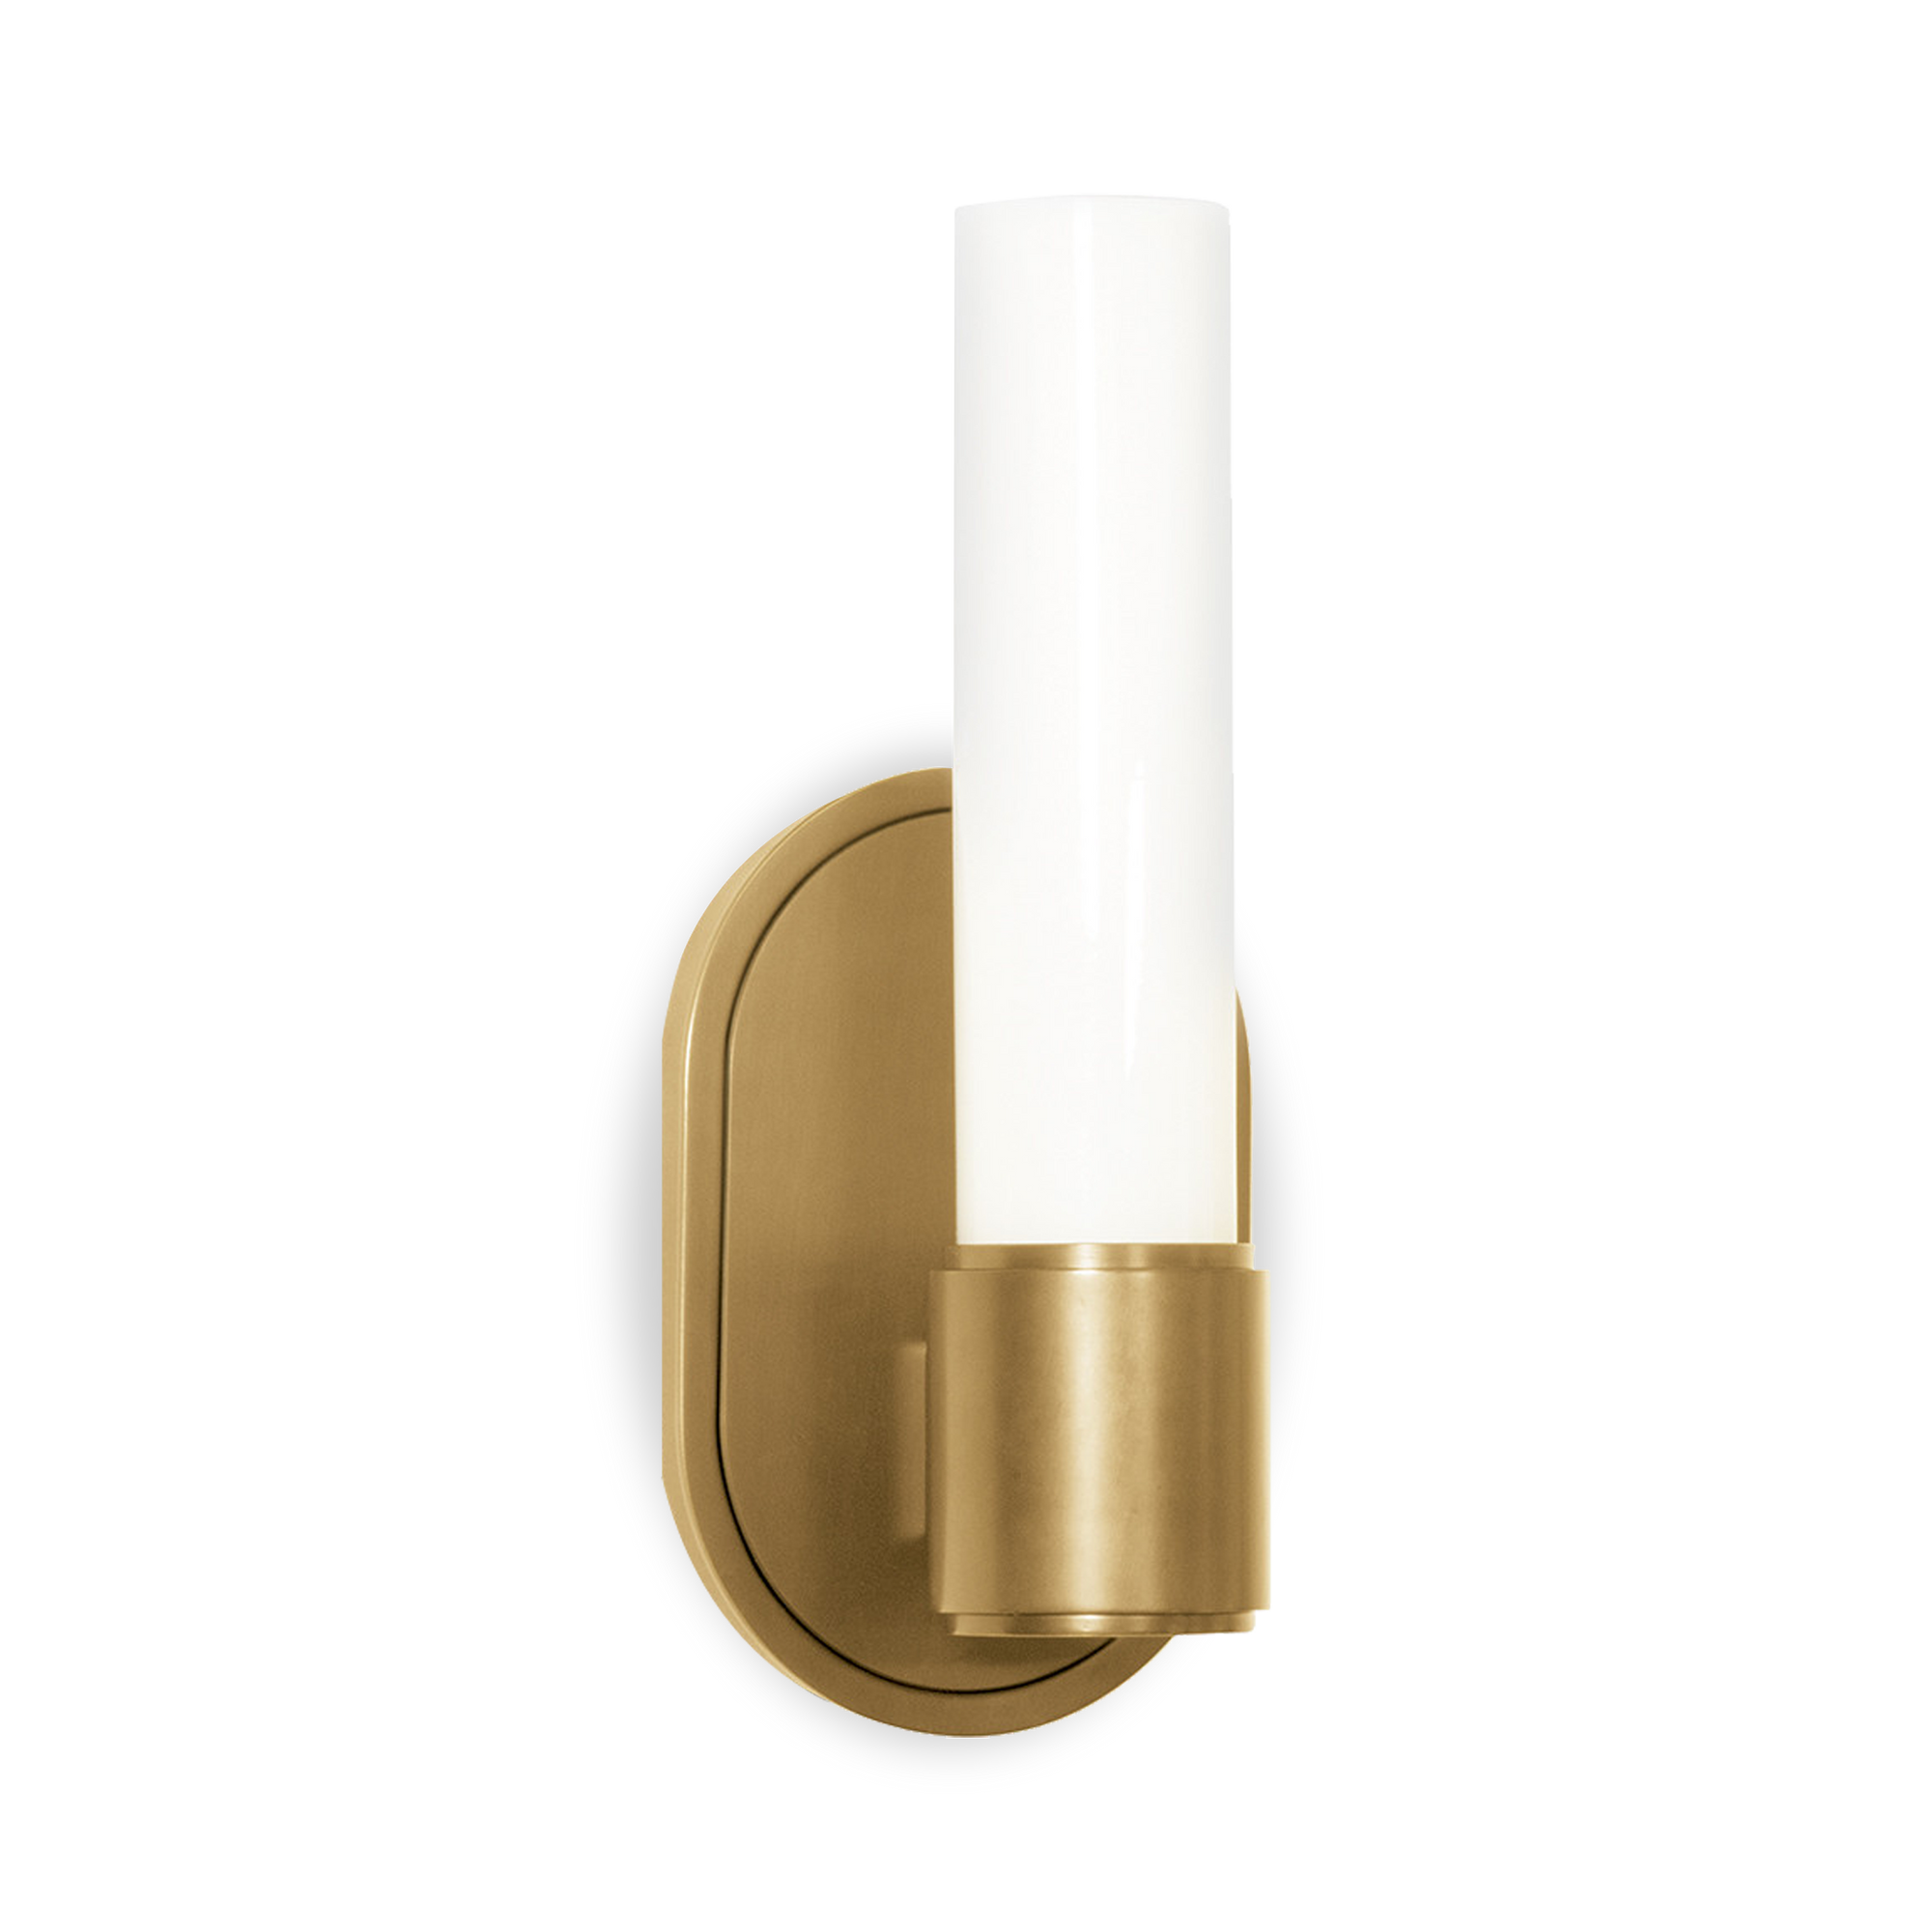 The Dixon Wall Light features hand-blown opal white glass covers and can be installed either horizontally or vertically.